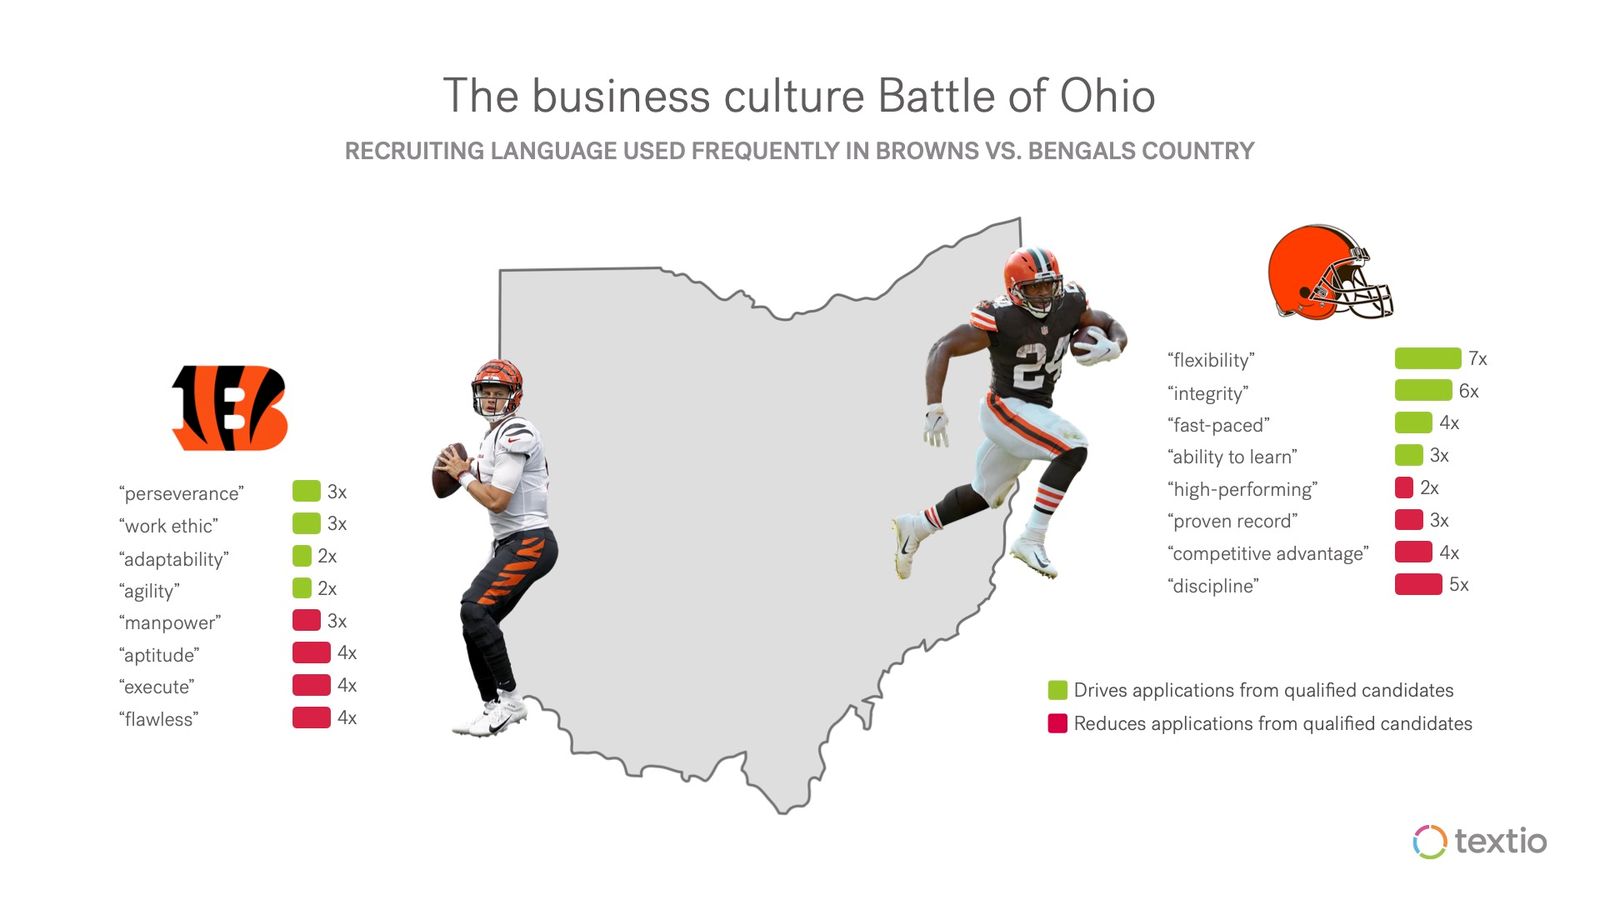 Map of Ohio with football players and different words appeal based on geography within the state. Titled: The business culture Battle of Ohio (recruiting language used frequently in browns vs. bengals).